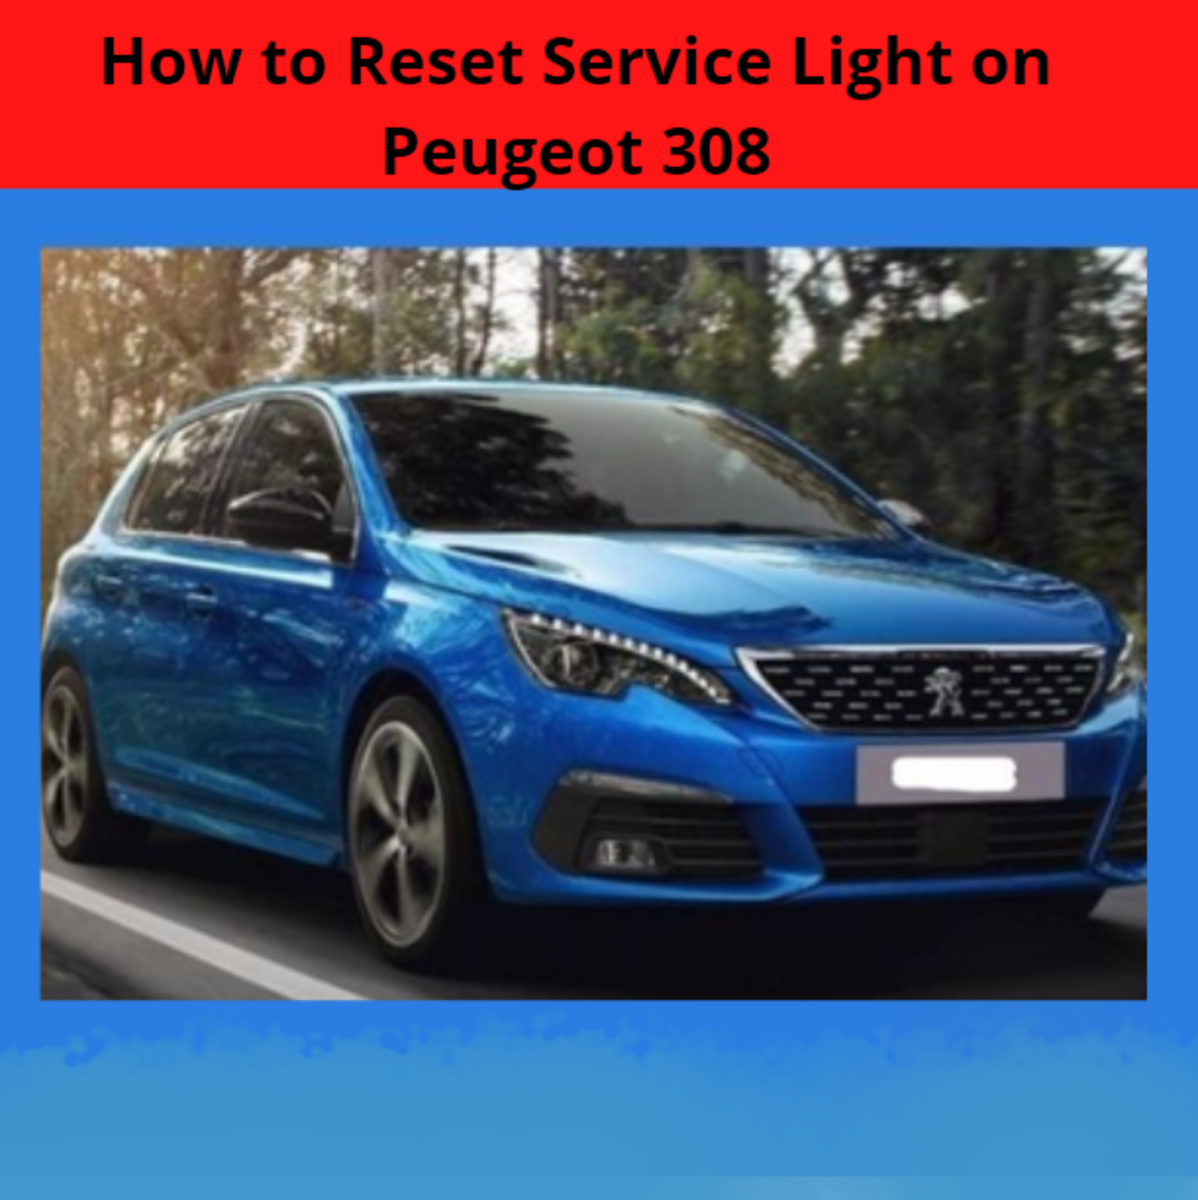 How to Reset Service Light on Peugeot 308